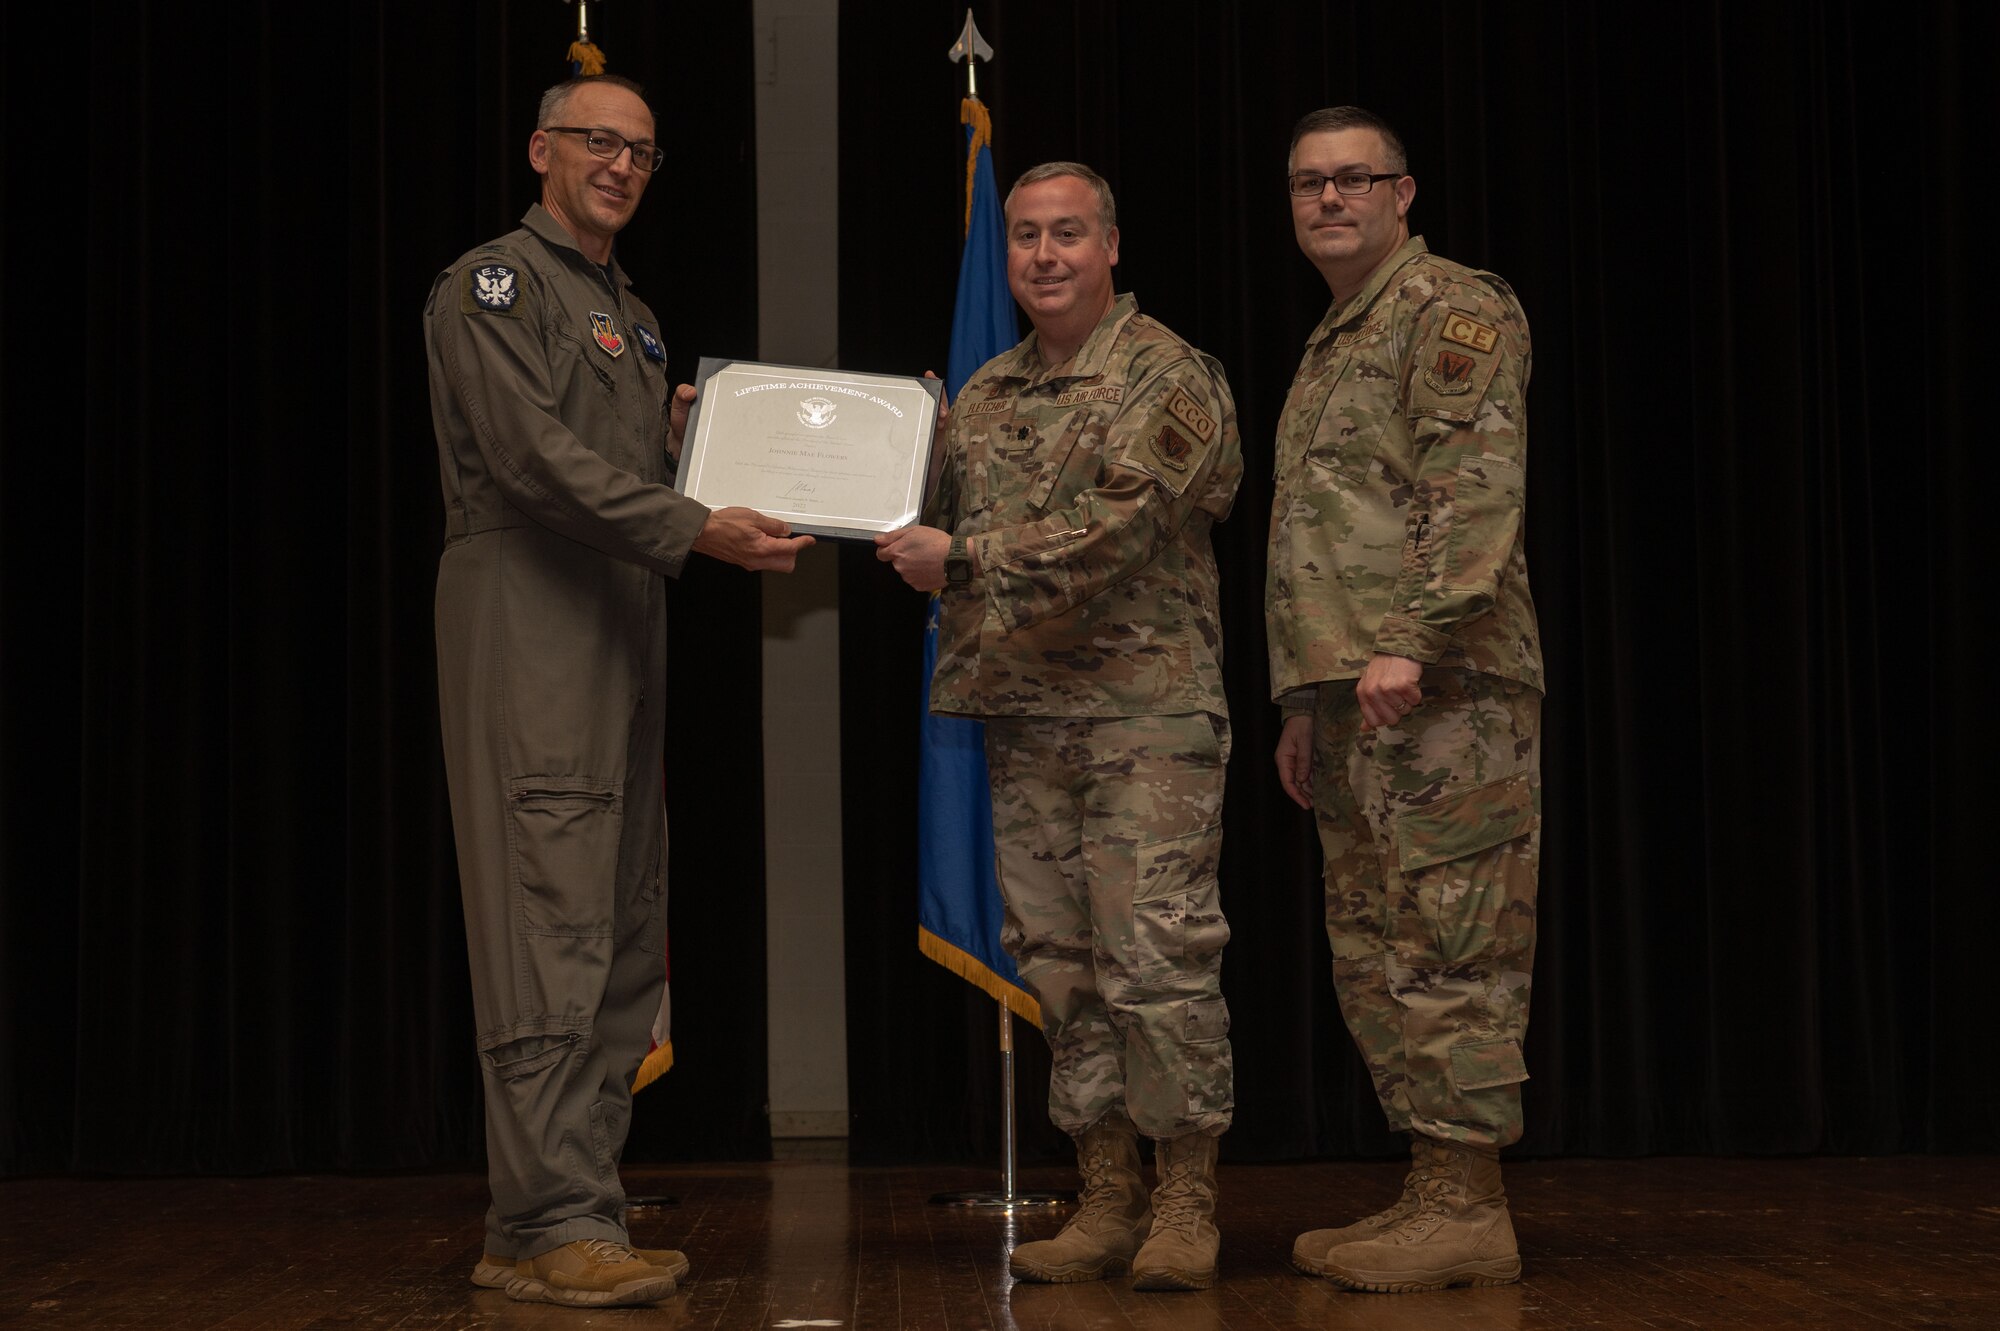 Col. Steven Bofferding, left, 4th Fighter Wing vice commander, Chief Master Sgt. Kyle O’Hara, right, 4th Civil Engineer Squadron command chief, present the Lifetime Achievement Award to Lt Col. Steven Fletcher, center, 414th Maintenance Squadron commander, who accepts the award for Johnnie Mae Flowers, during a volunteer appreciation ceremony at Seymour Johnson Air Force Base, North Carolina, April 21, 2023. The Lifetime Achievement Award is presented to those who have accumulated over 4,000 hours of volunteer hours. (U.S. Air Force photo by Airman 1st Class Rebecca Sirimarco-Lang)